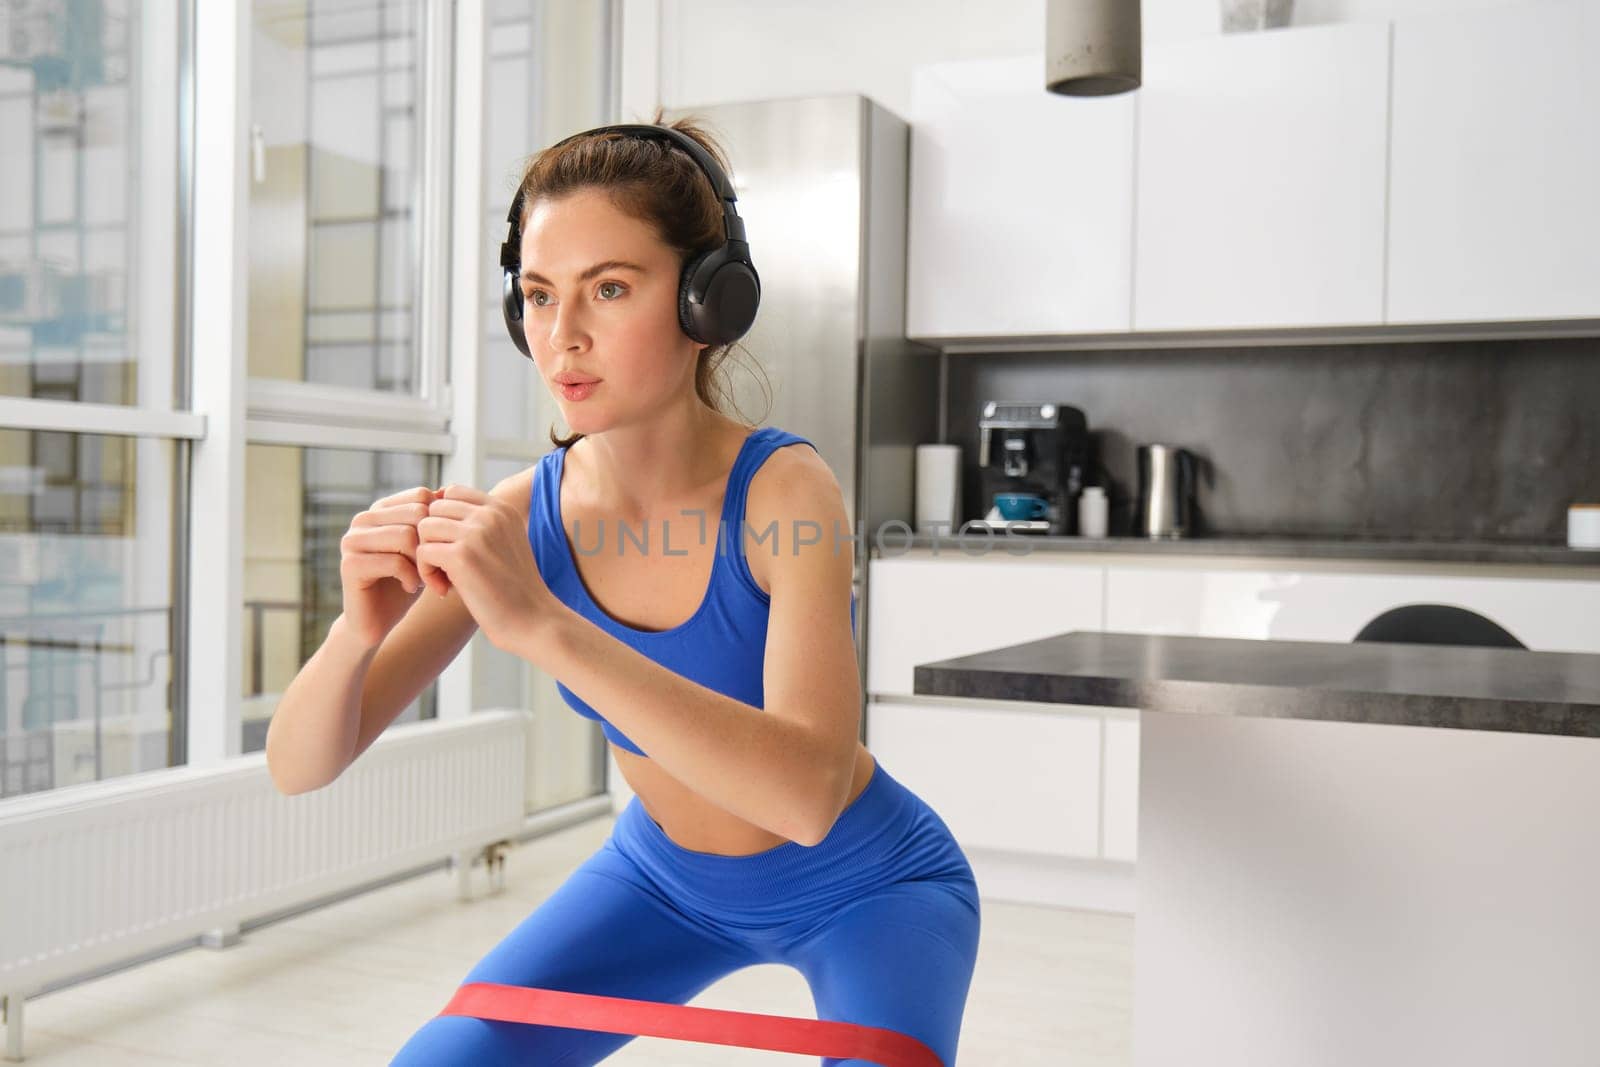 Portrait of woman doing squats with elastic resistance band, looking focused during workout, doing exercises at home.